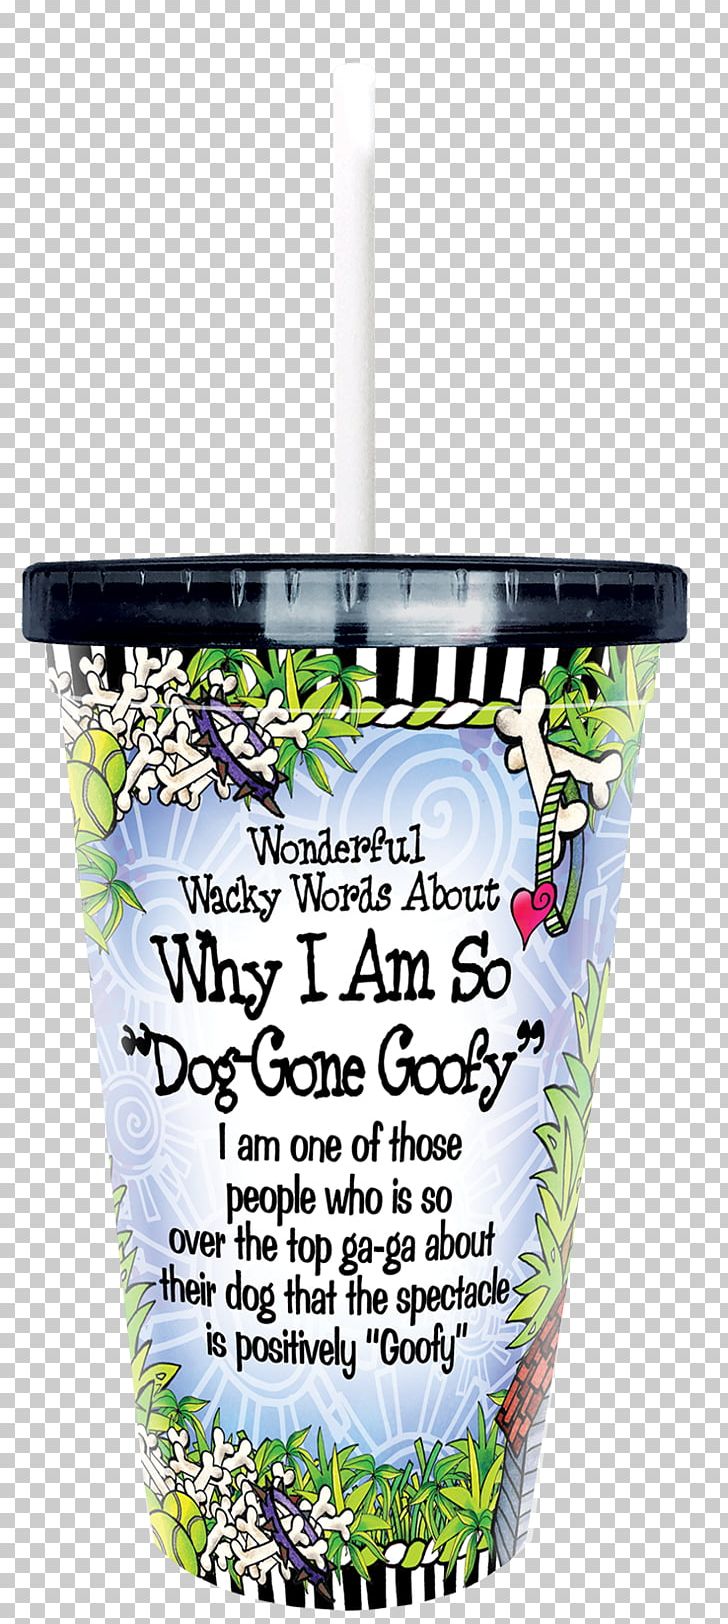 Dog Cup Goofy Table-glass Toronto PNG, Clipart, Animals, Cat, Cup, Dog, Drinkware Free PNG Download